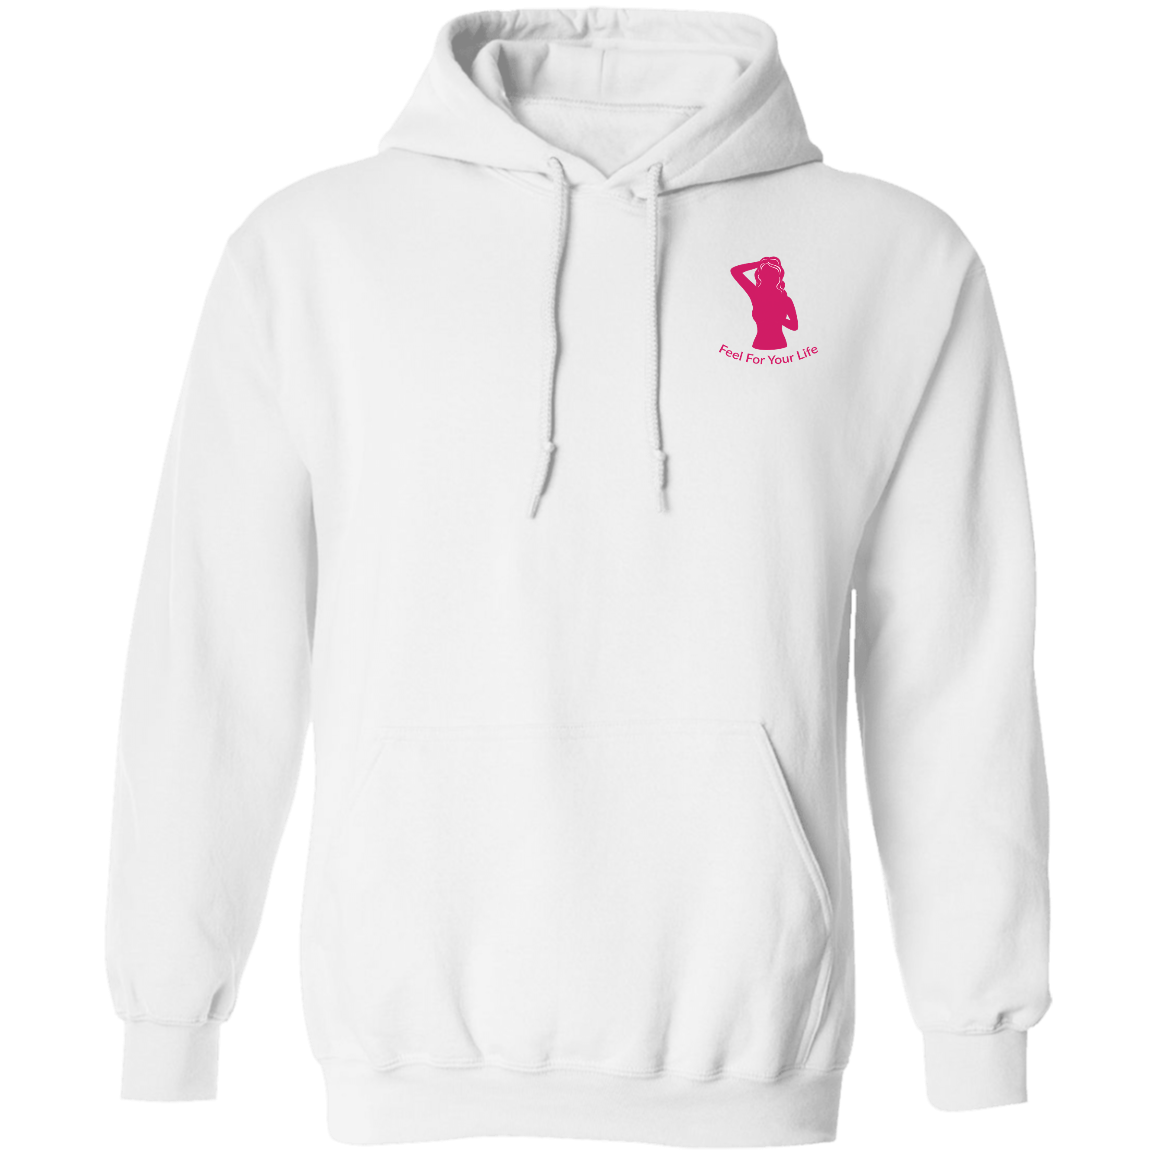 Feel For Your Life Unisex Hoodie White w/ Hot Pink Logo Small